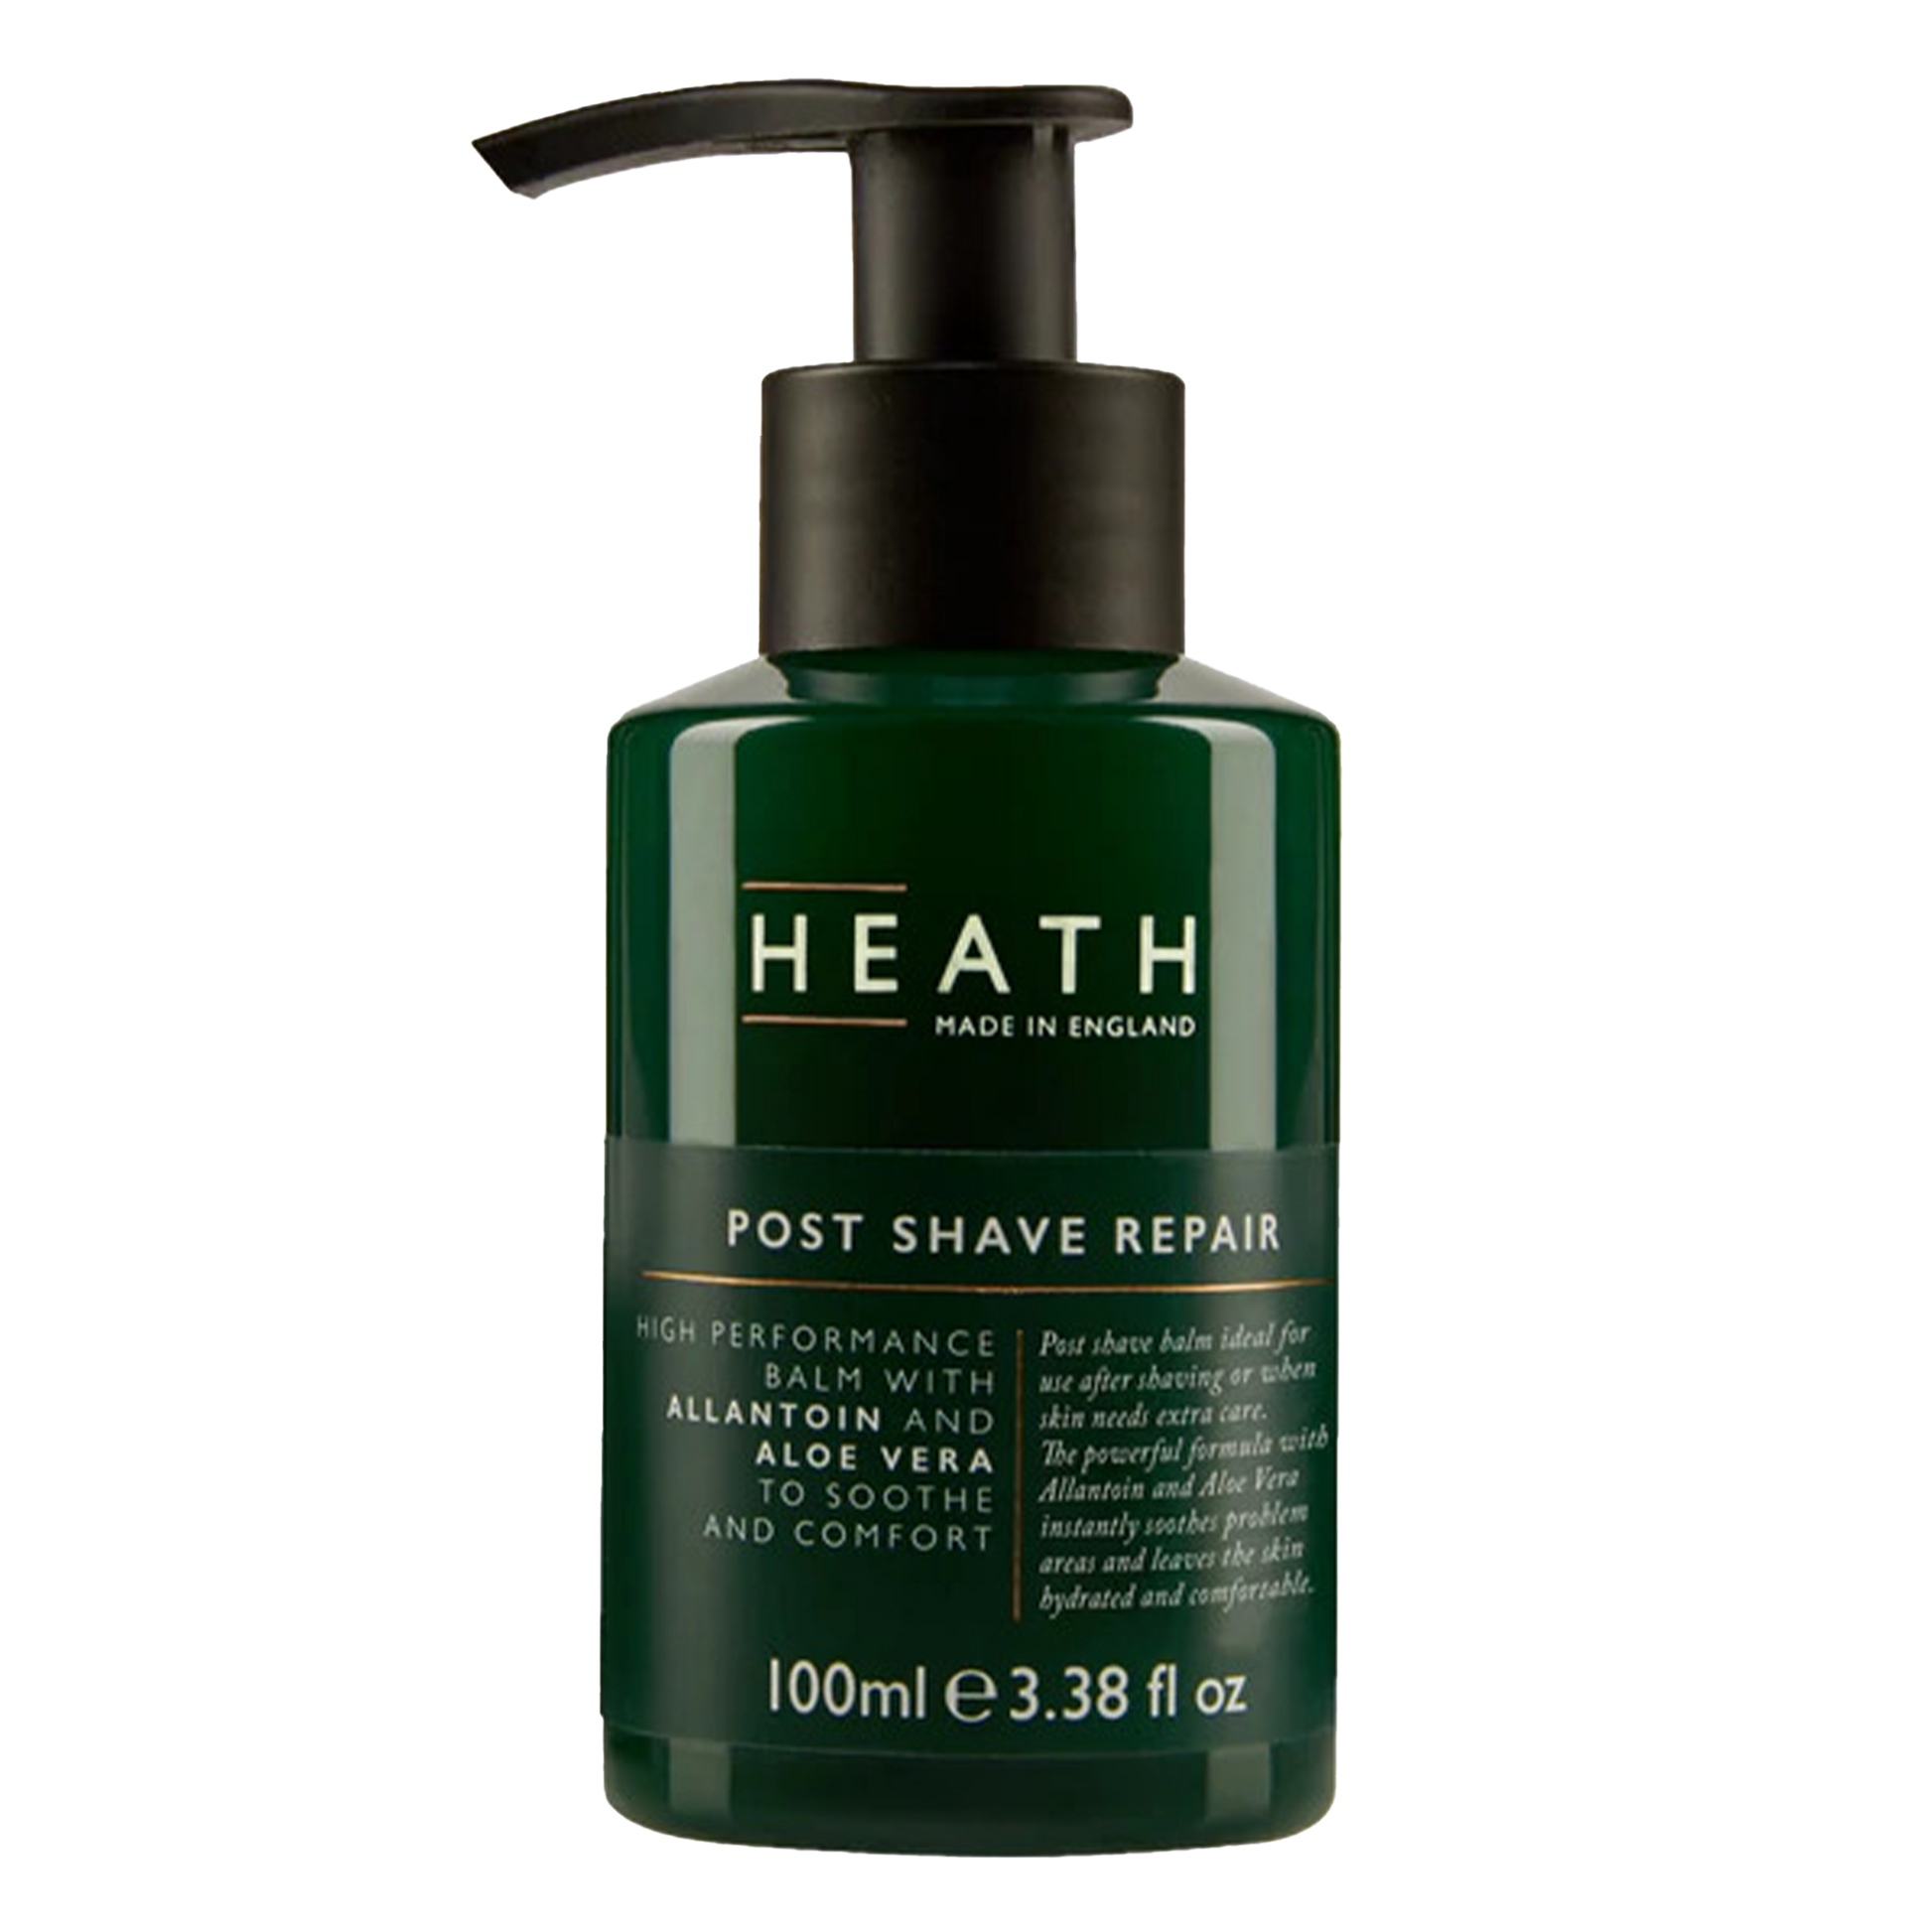 Heath Post Shave Repair: Post shave balm ideal for use after shaving or when skin needs extra care.  The powerful formula with Allantoin and Aloe Vera instantly soothes problem areas and leaves the skin hydrated and comfortable.